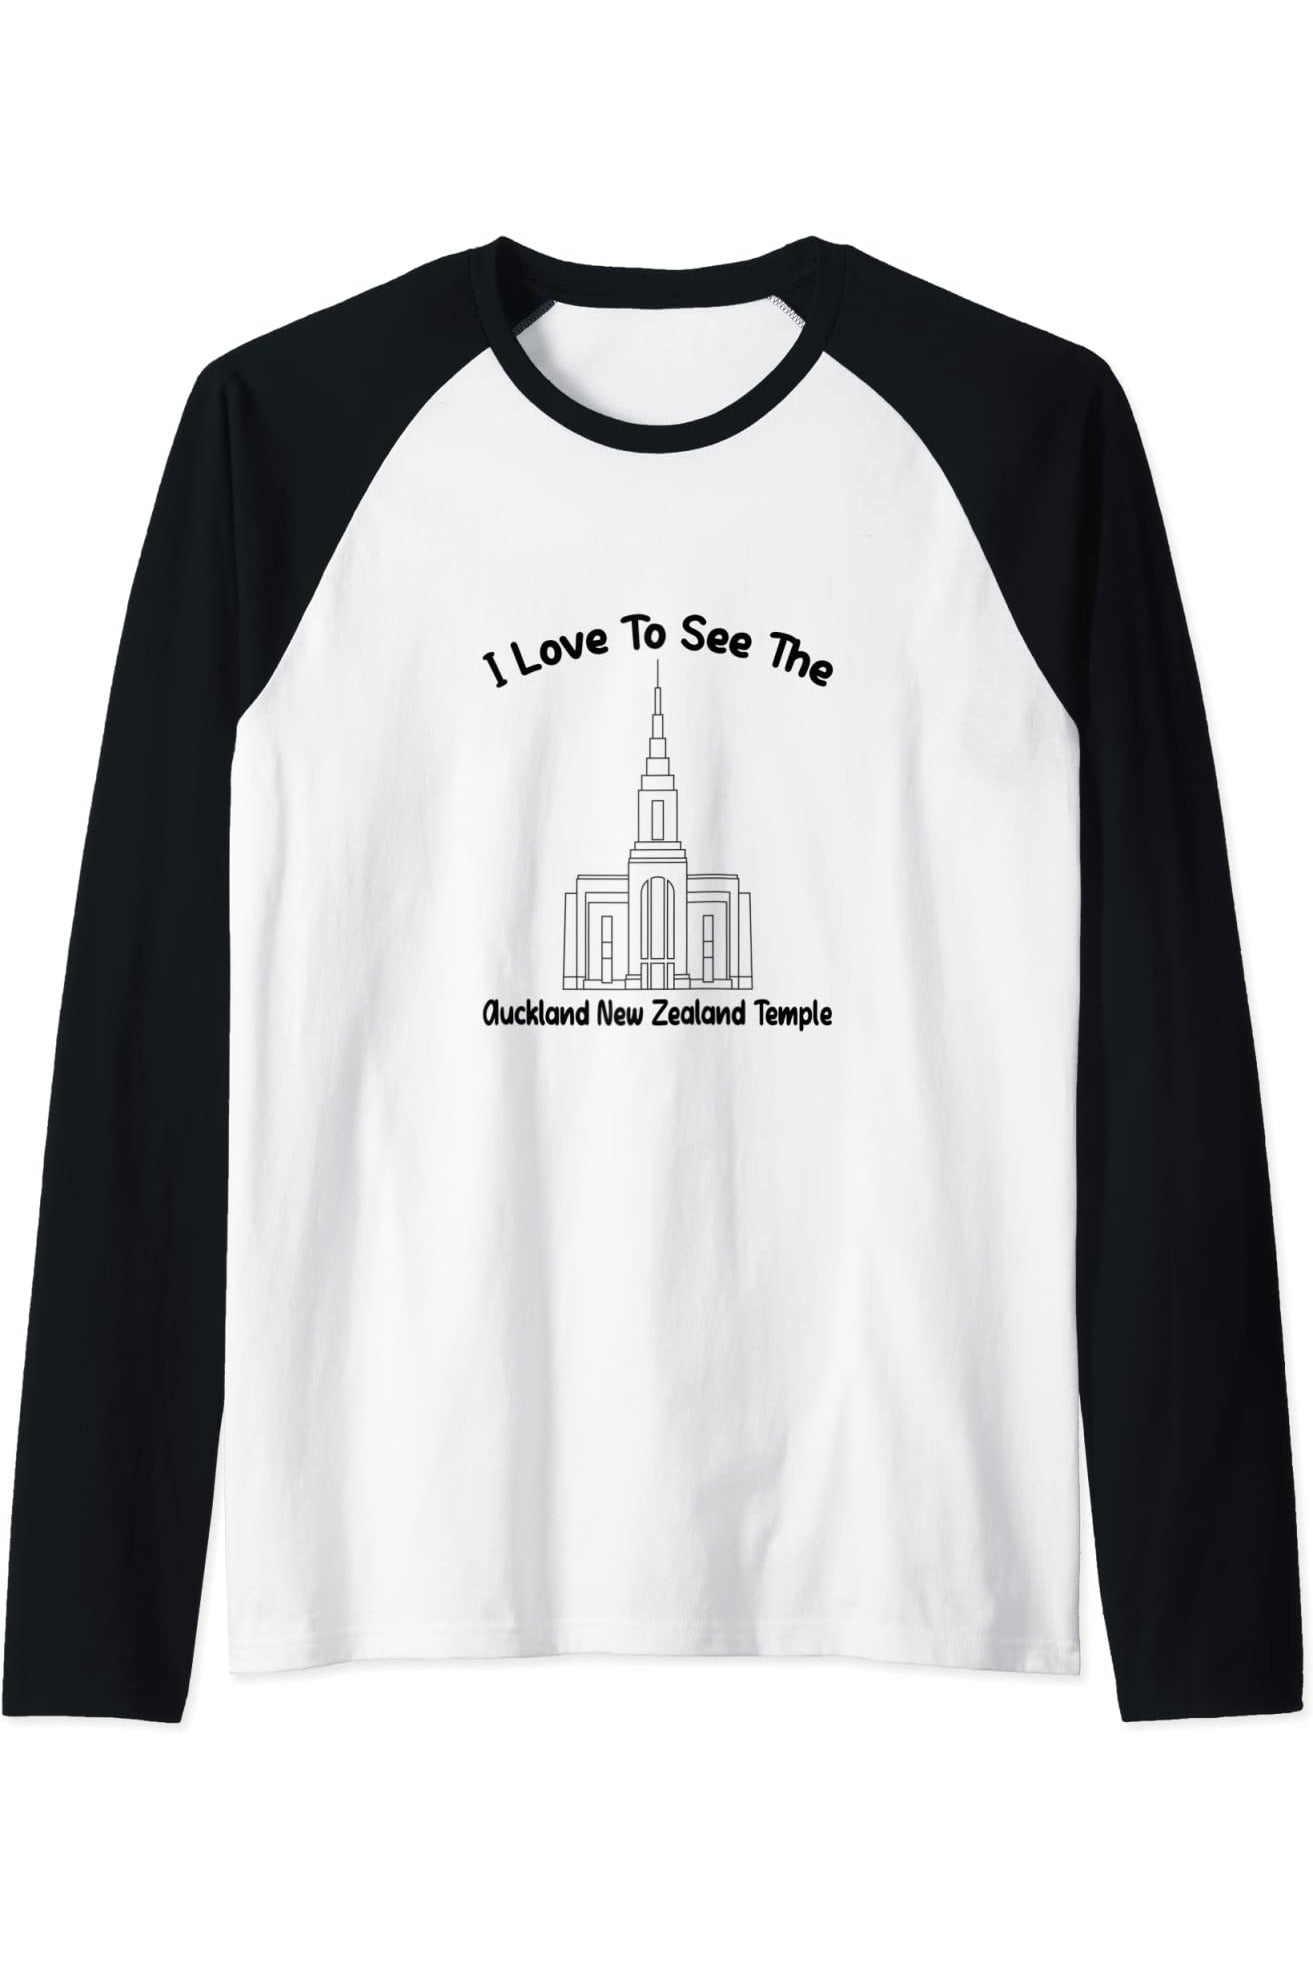 Auckland New Zealand Temple Raglan - Primary Style (English) US